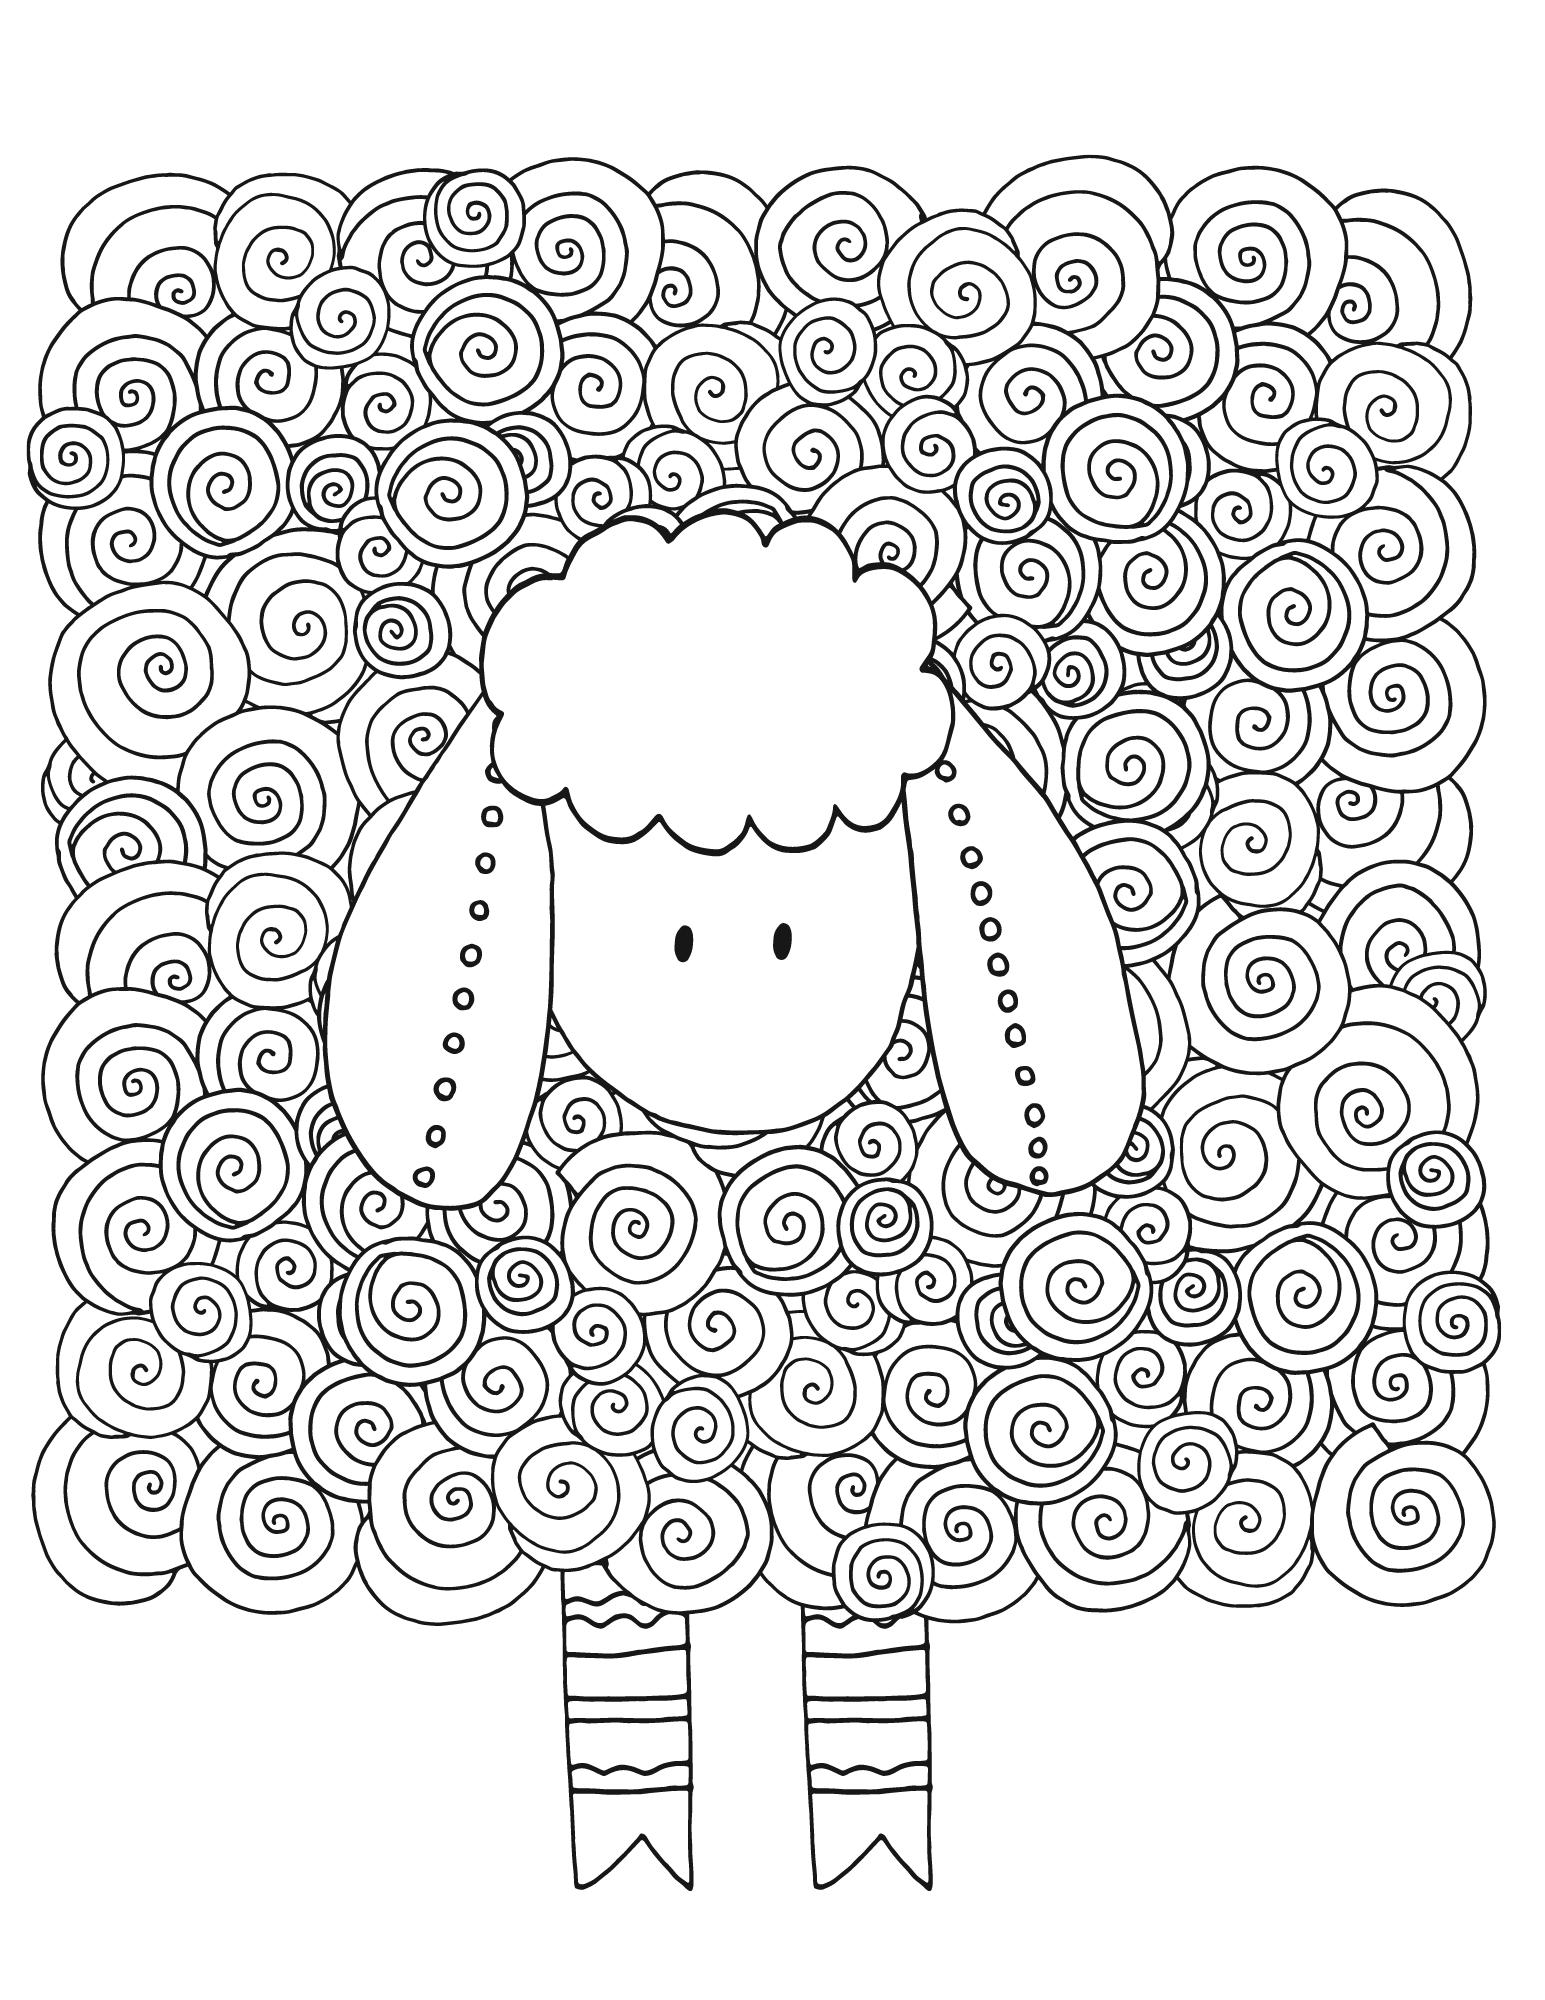 Superb sheep coloring pages for kids and adults